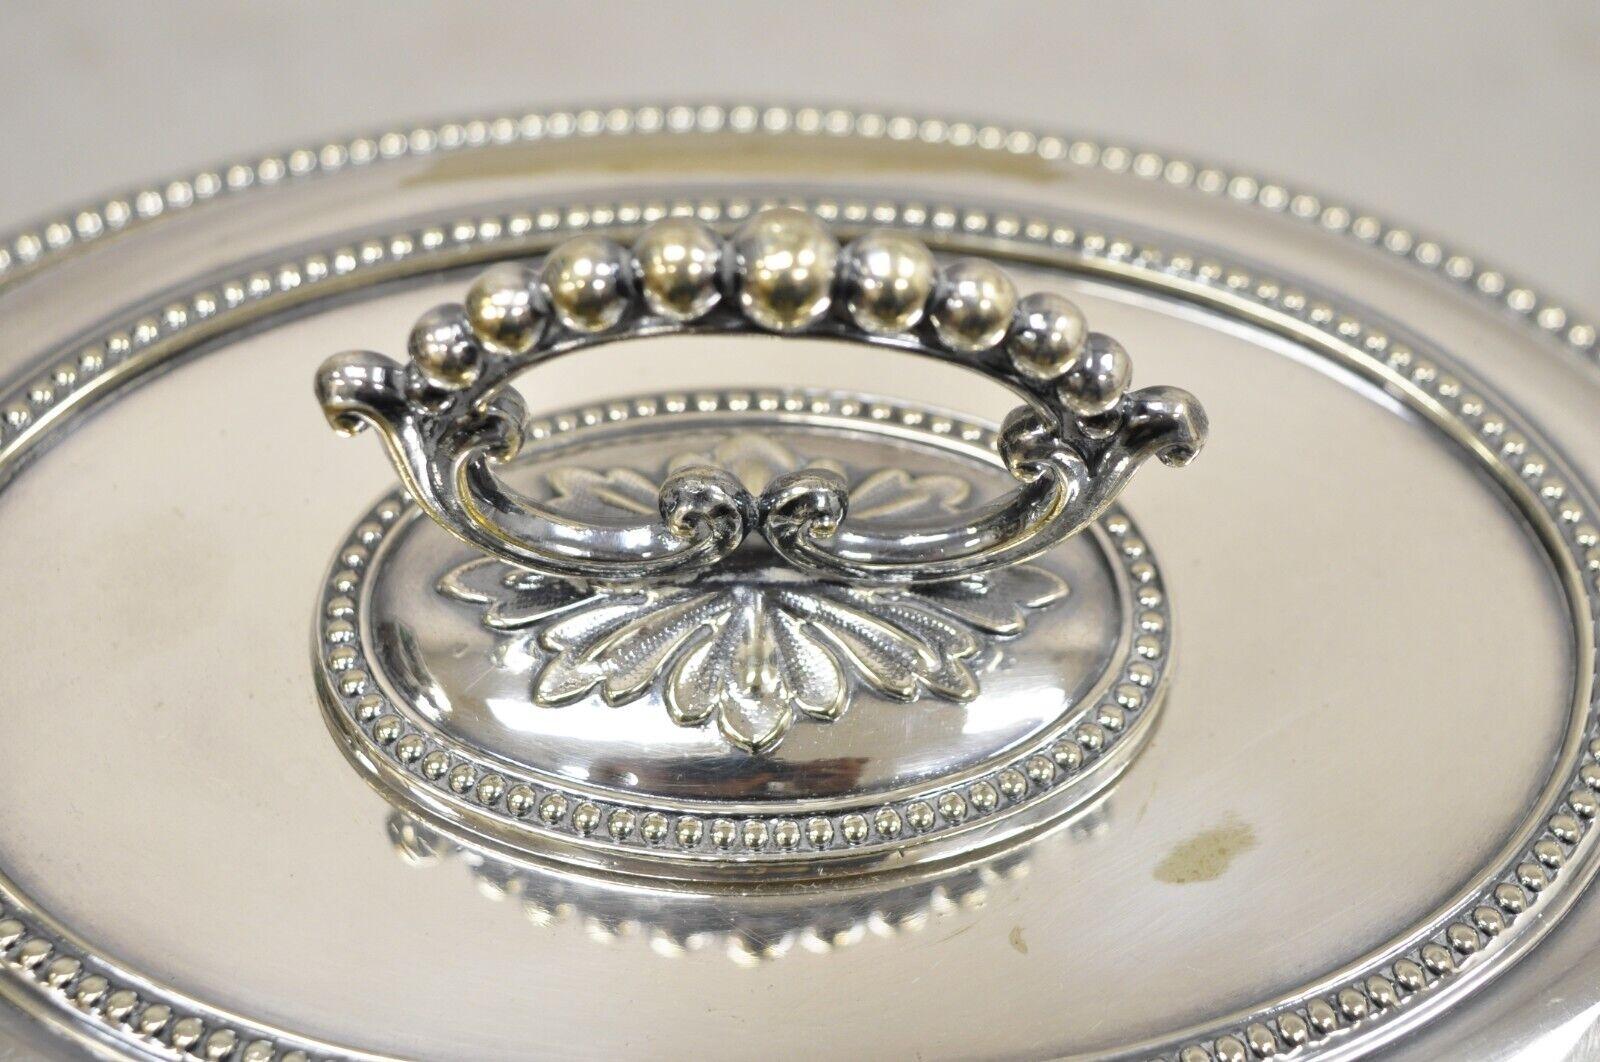 Mappin & Webb's Prince's Plate English Sheffield Silver Plated Covered Dish im Angebot 2